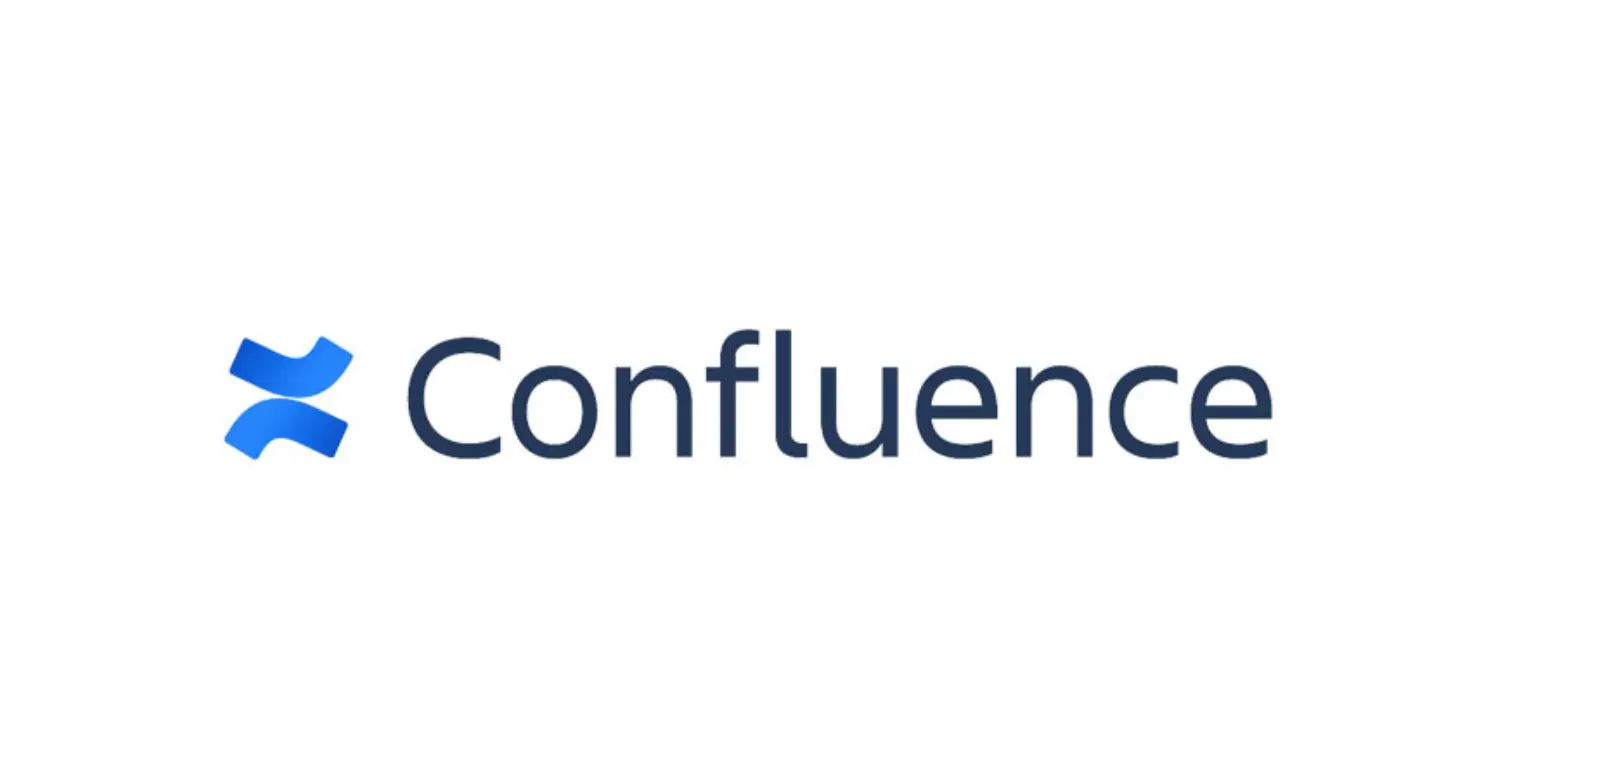 What is Atlassian Confluence? How to create your page on Atlassian Confluence?